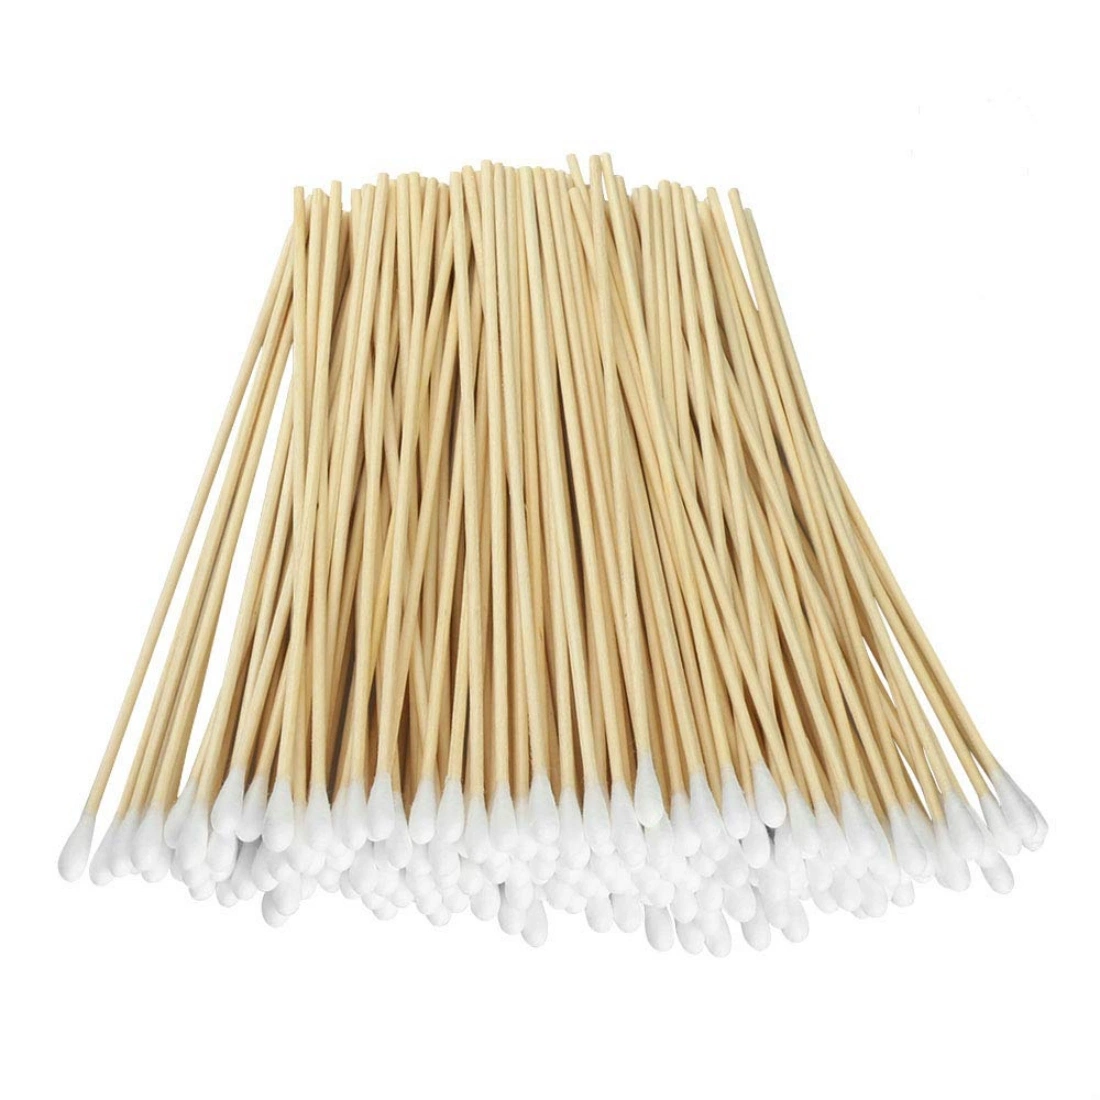 100PCS Double Head Cotton Swab Bamboo Cotton Swabs Wood Sticks Disposable Buds Cotton for Nose Ears Cleaning Tools